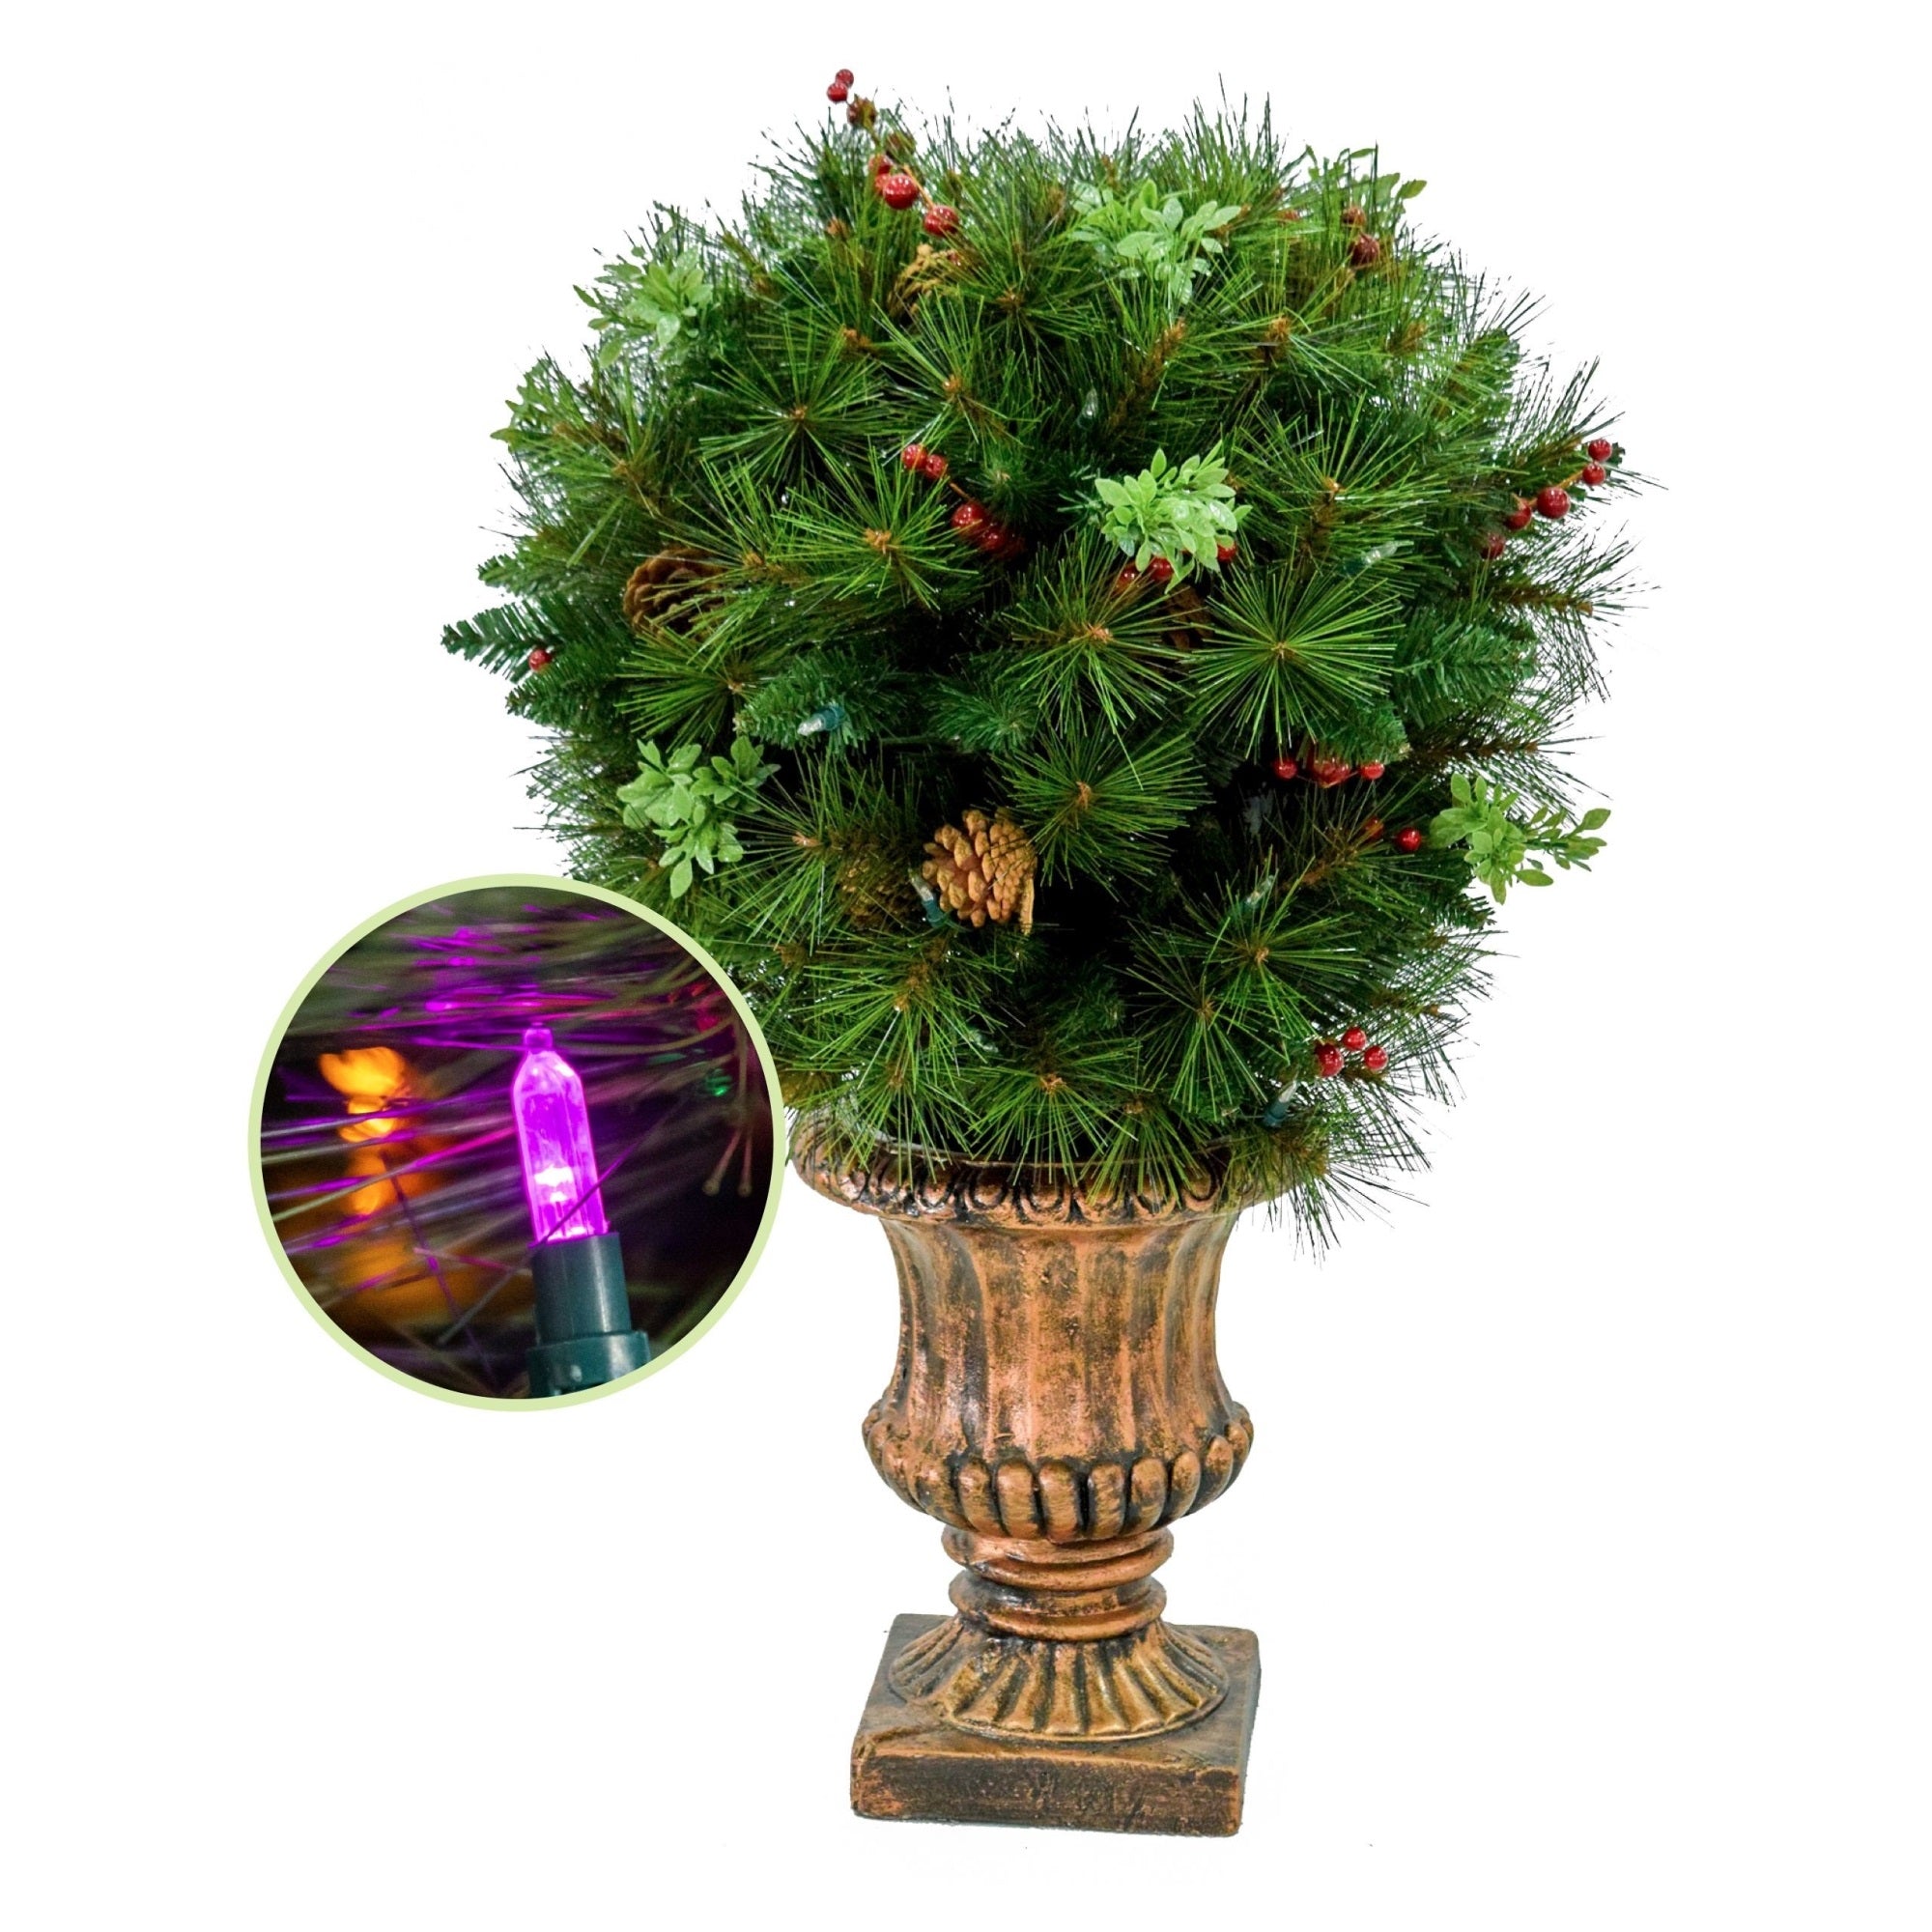 Garden Elements Battery Operated Christmas Compact Ball Porch Tree in Bronze Container with Pinecones and Berries, 220 Tips, 70 Lights 20" D x 30" H